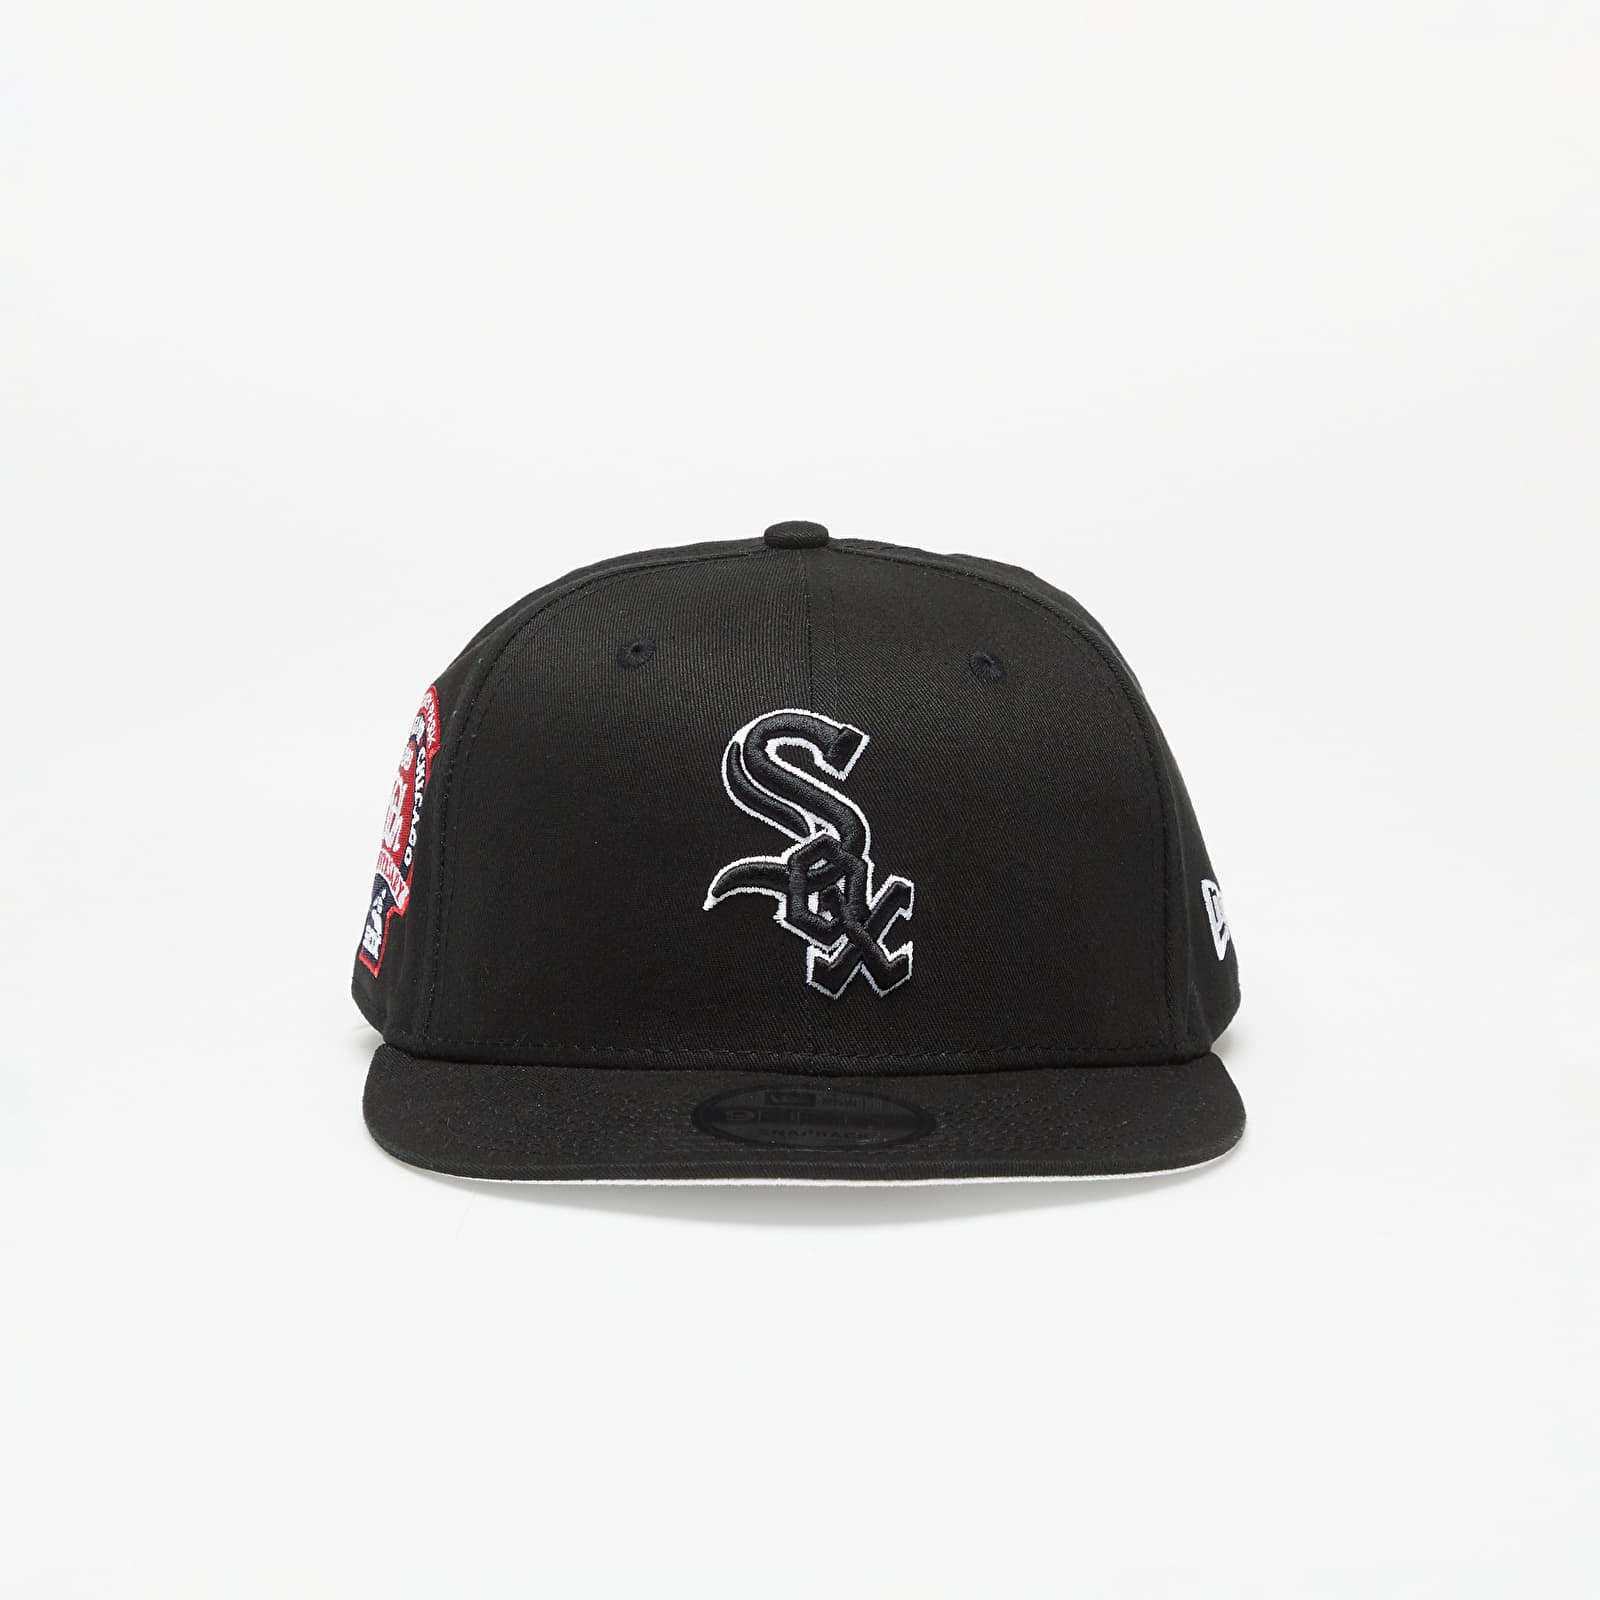 New Era - chicago white sox side patch 9fifty snapback cap black/ white